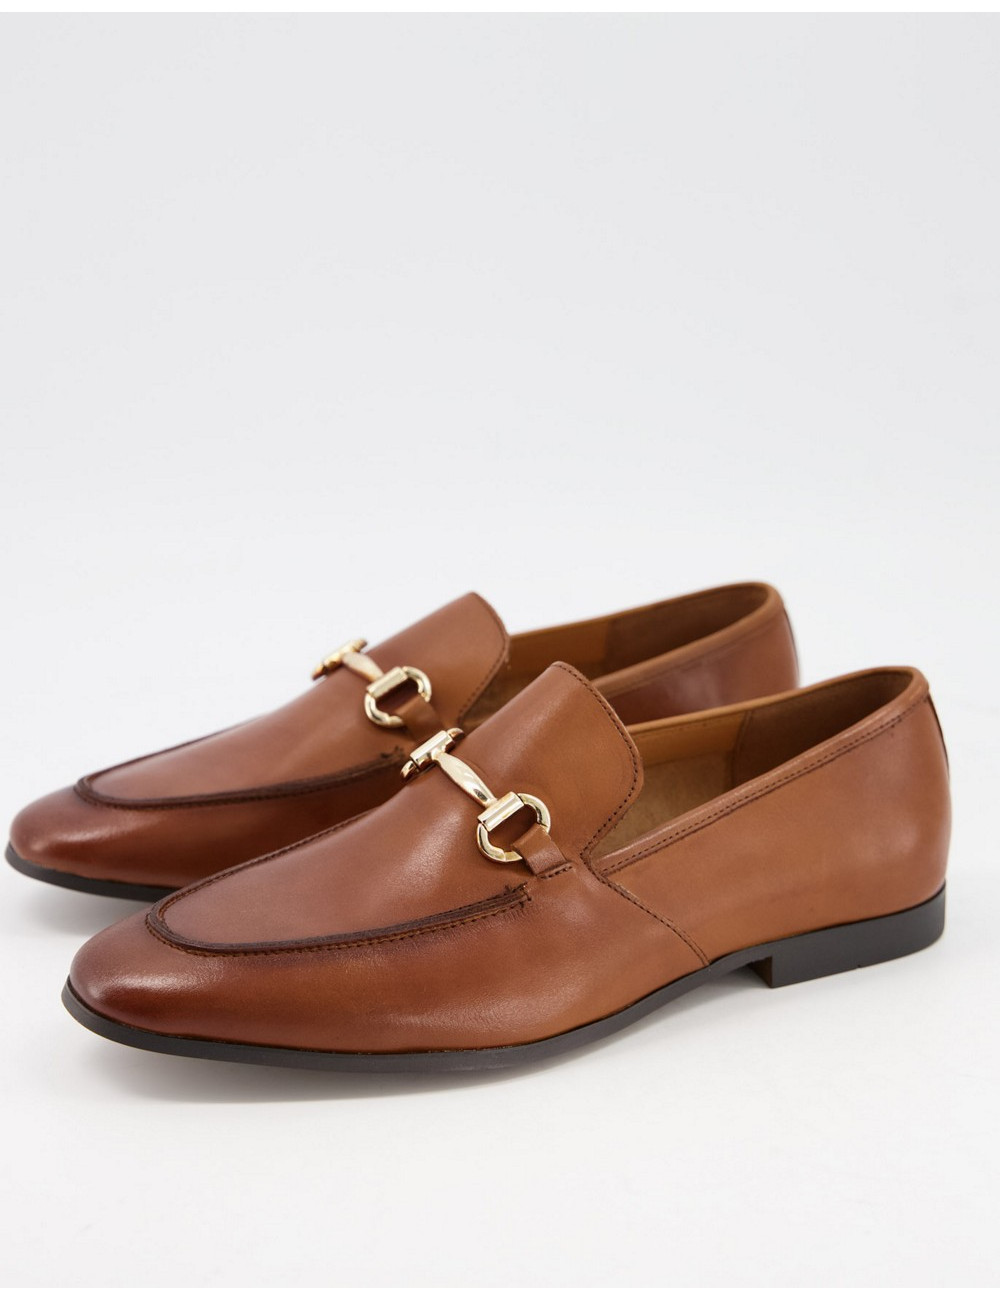 Office lemming bar loafers...